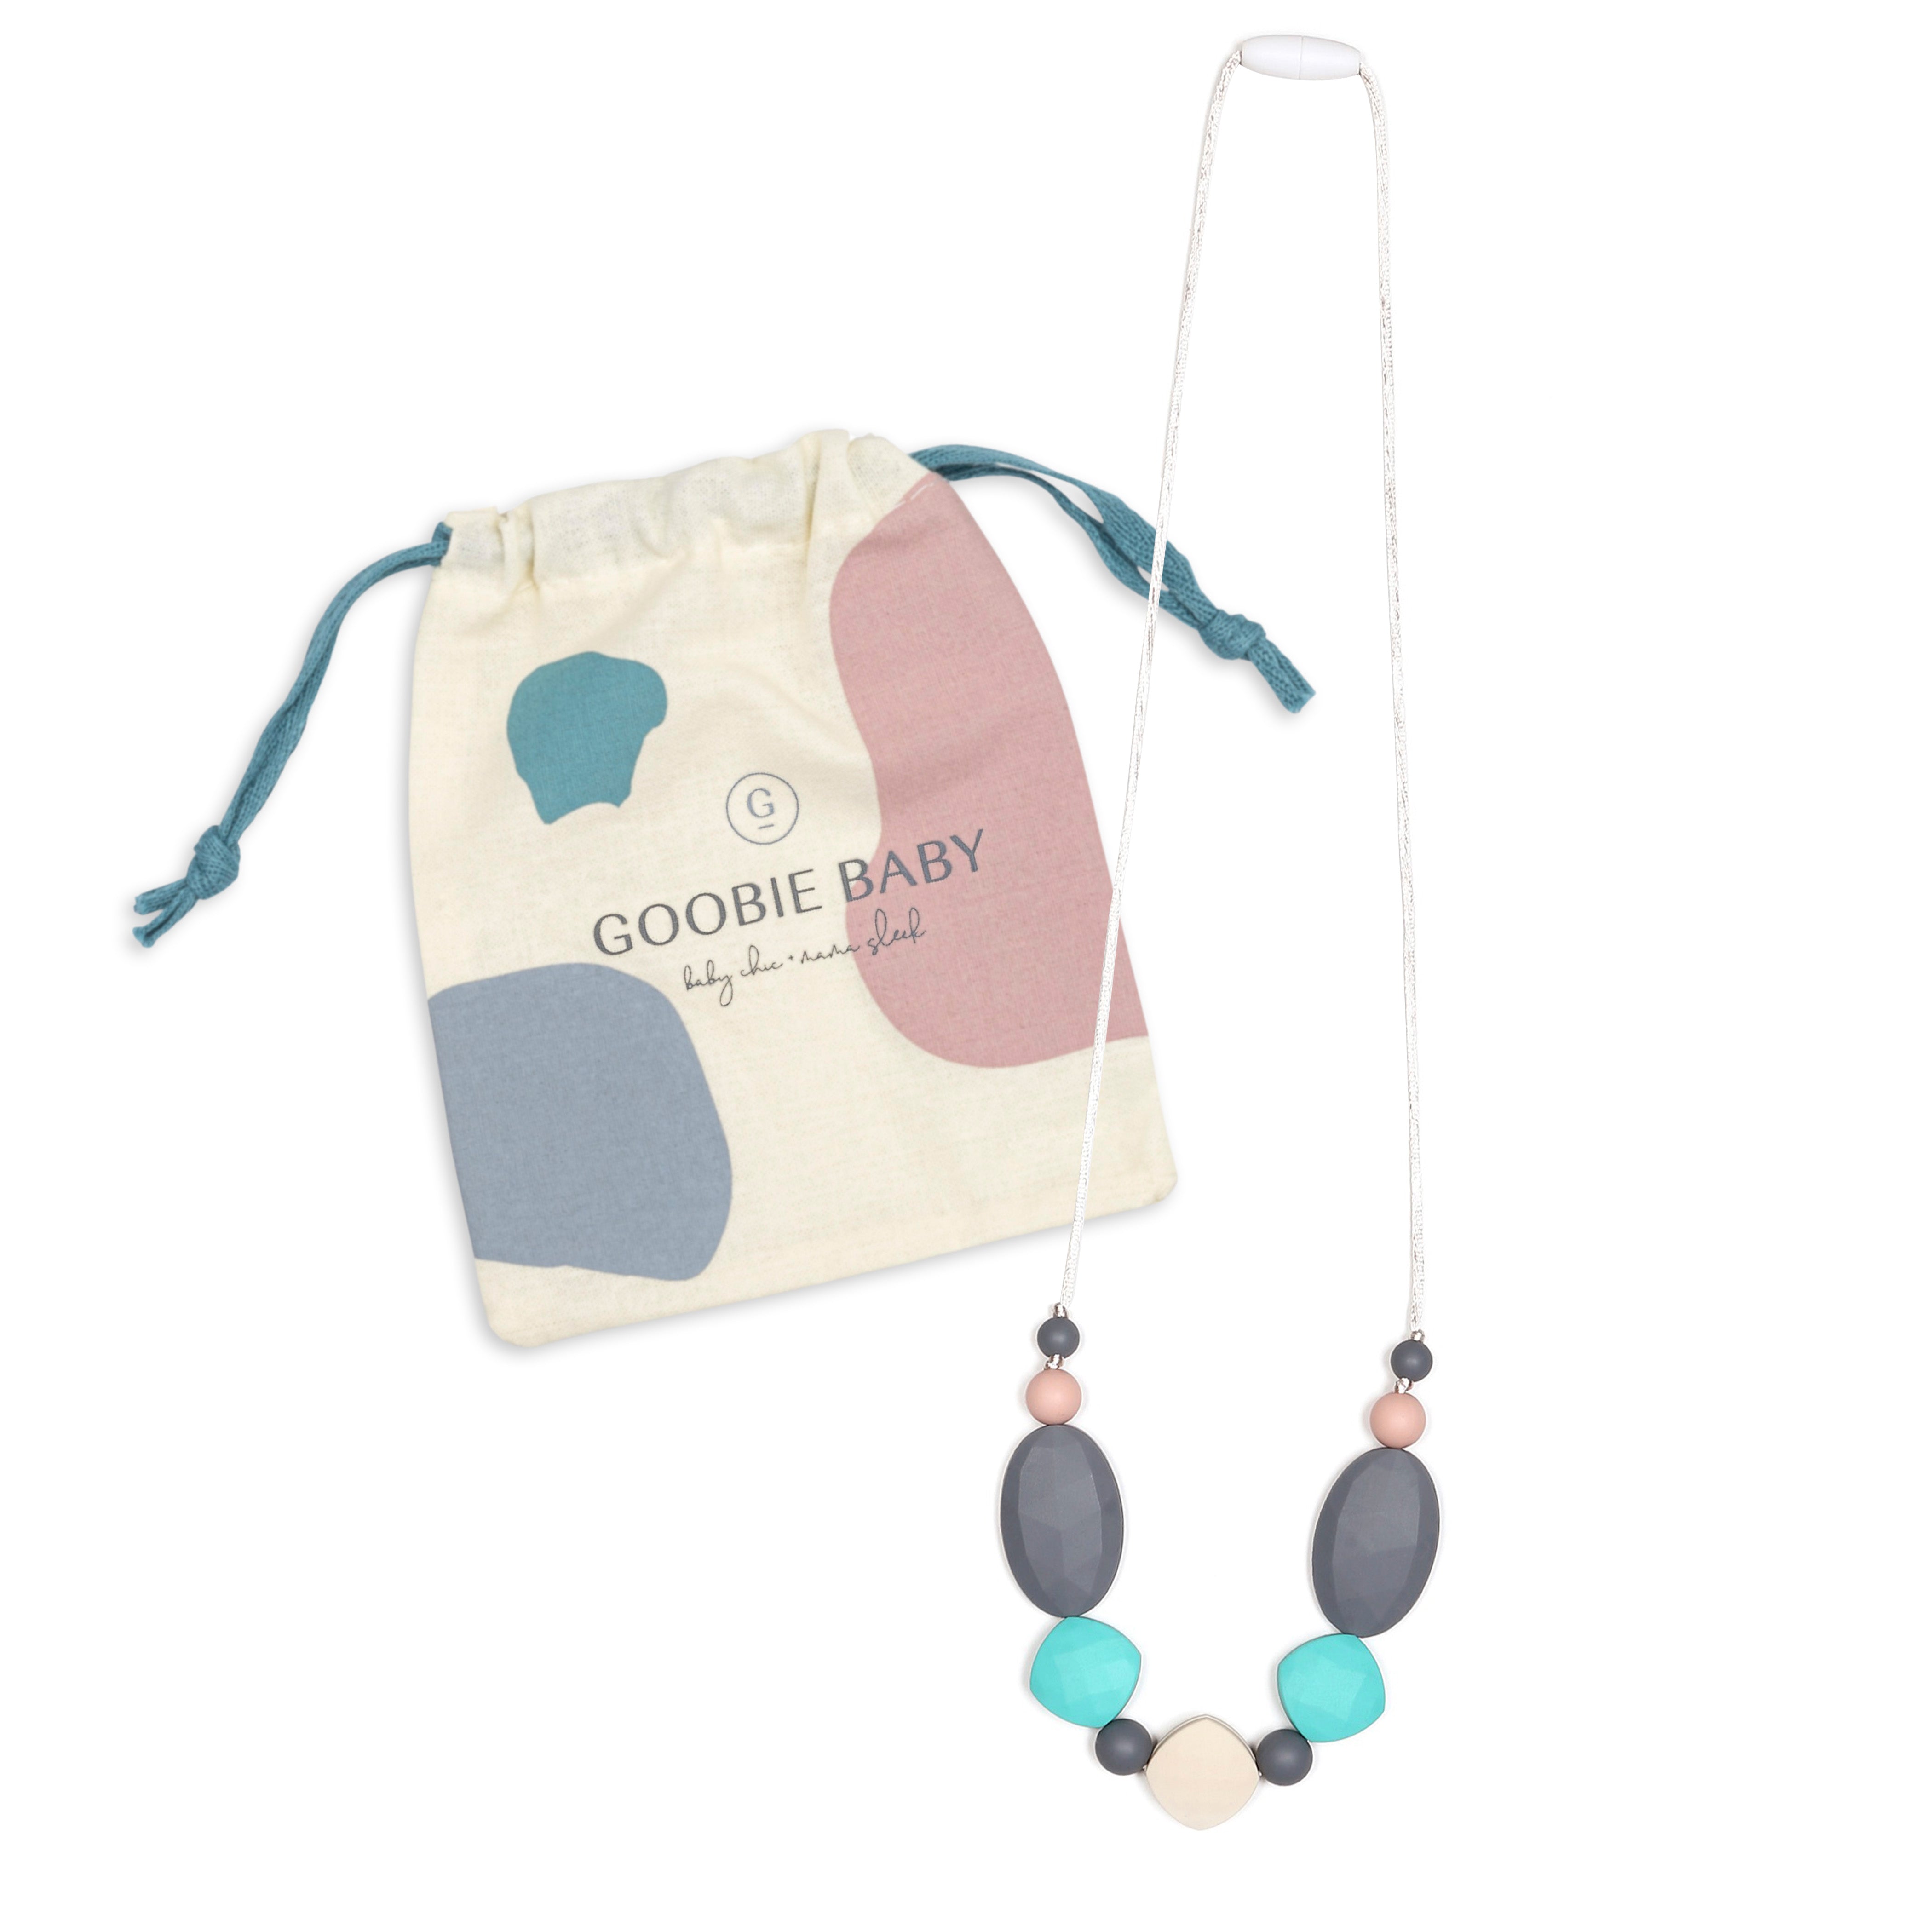 Luna Teething Necklace - Turquoise/Gray/Peach/Cream